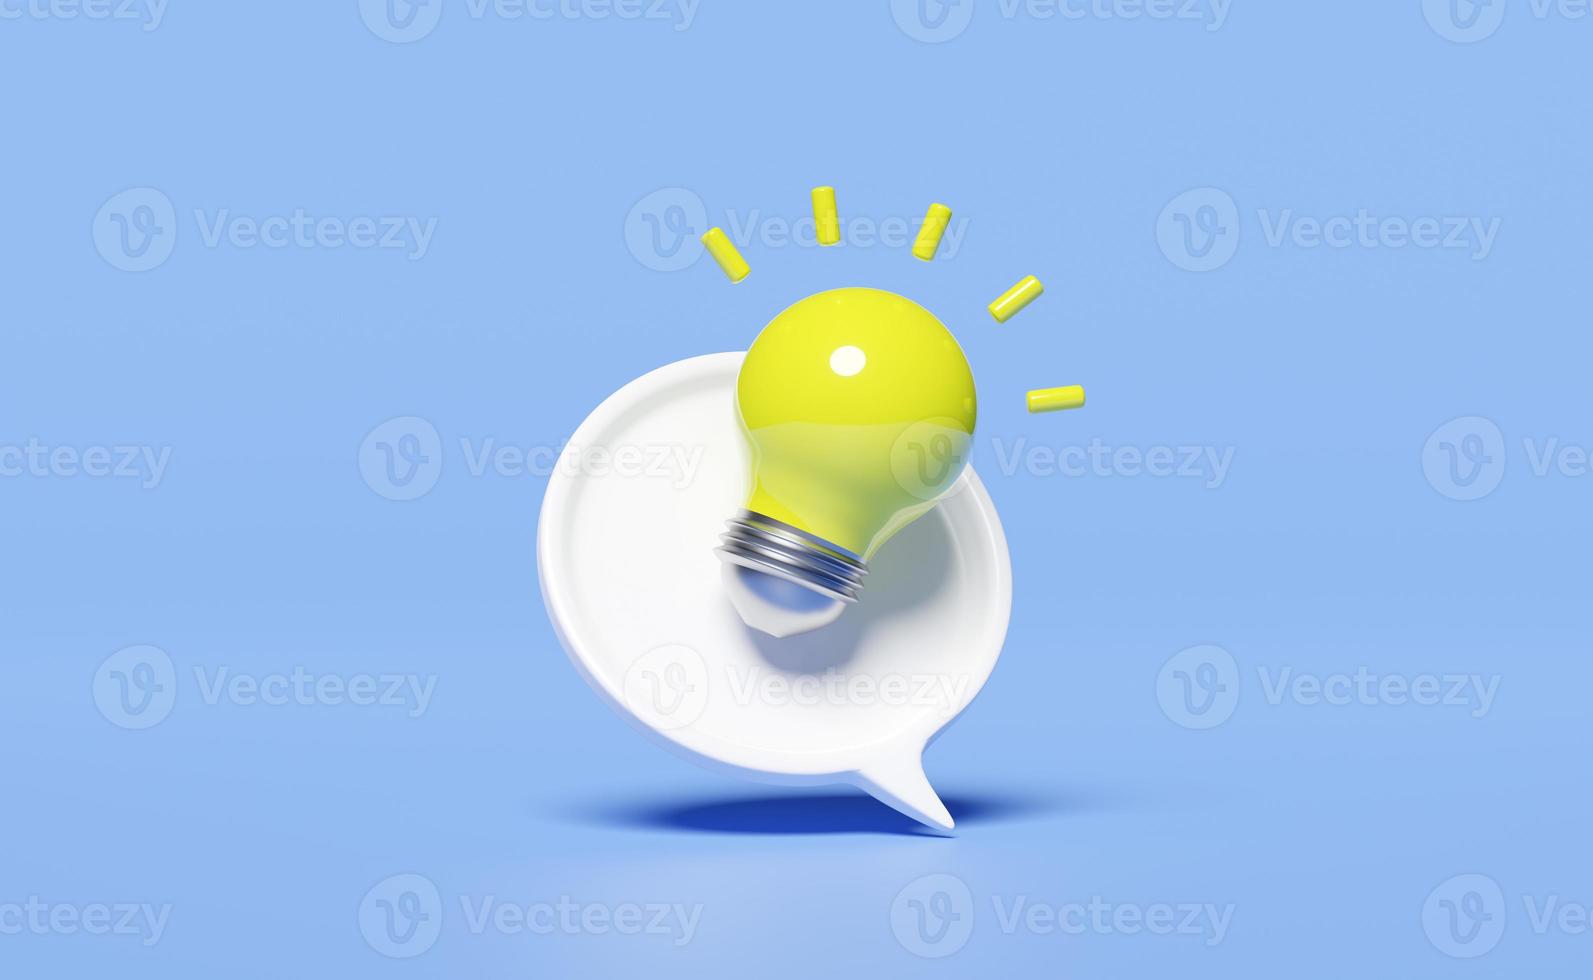 3D chat bubbles icons with yellow light bulb isolated on blue background. seo, minimal social media messages, idea tip concept, 3d render illustration photo